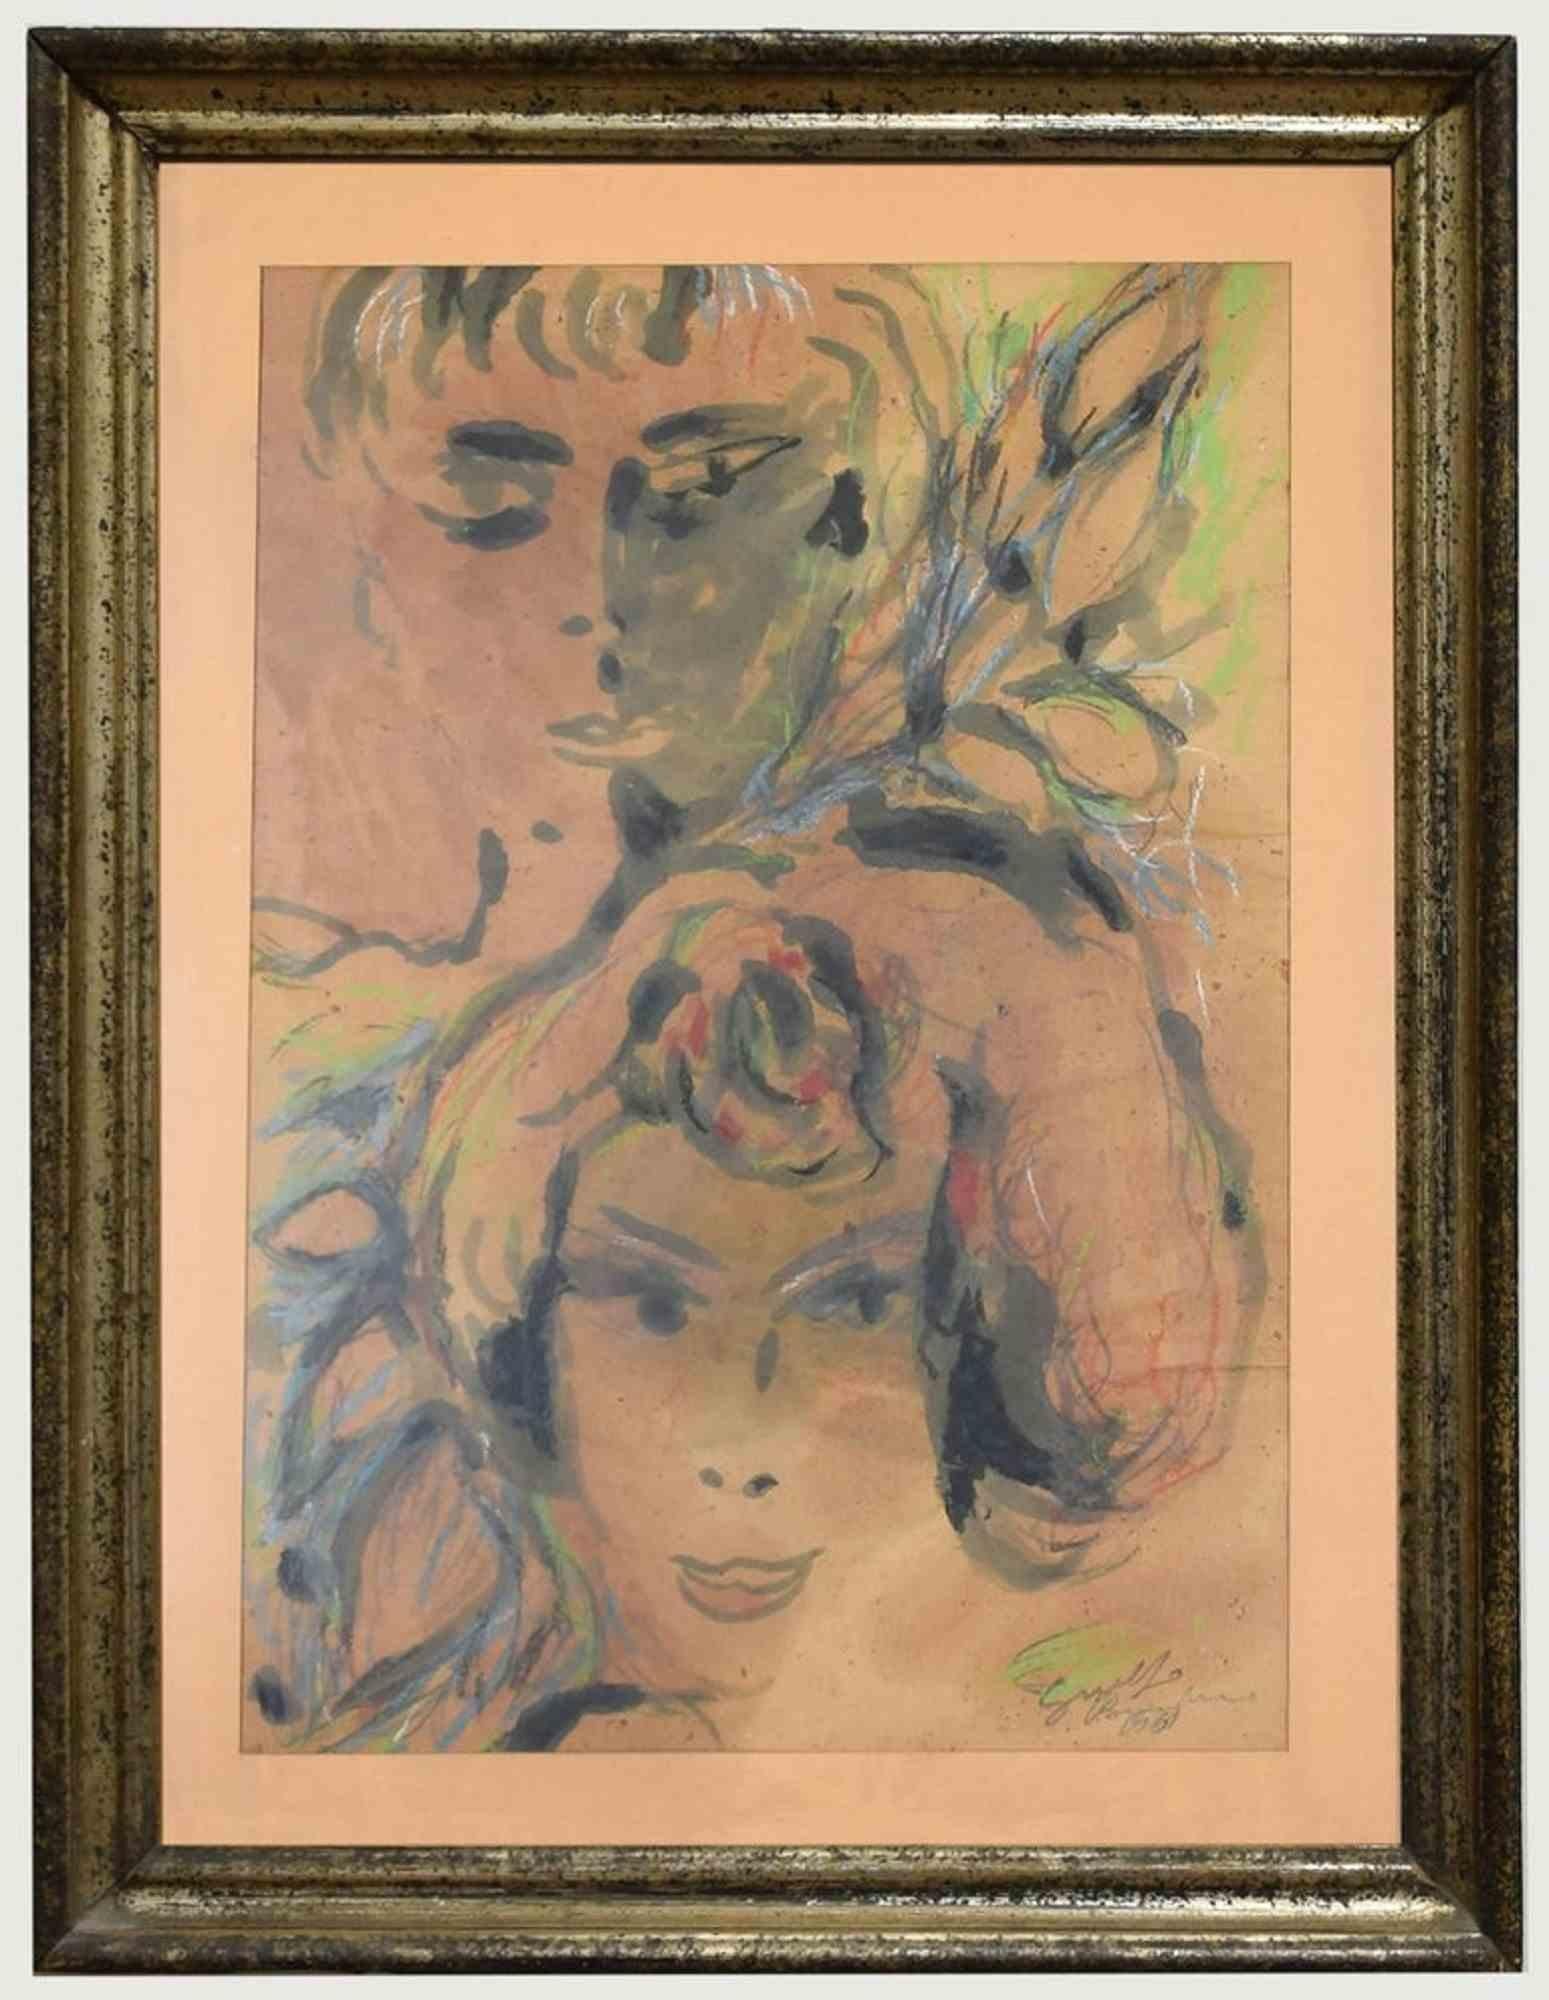 Women is an original watercolor drawing realized by Guelfo Bianchini in 1961.

The artwork is hand signed and daed by the artist.

Includes frame: 68.5 x 3.5 x 51.5  cm

Guelfo Bianchini Ancona 1937 - Rome 1977. Born in Fabriano in 1937, he lives